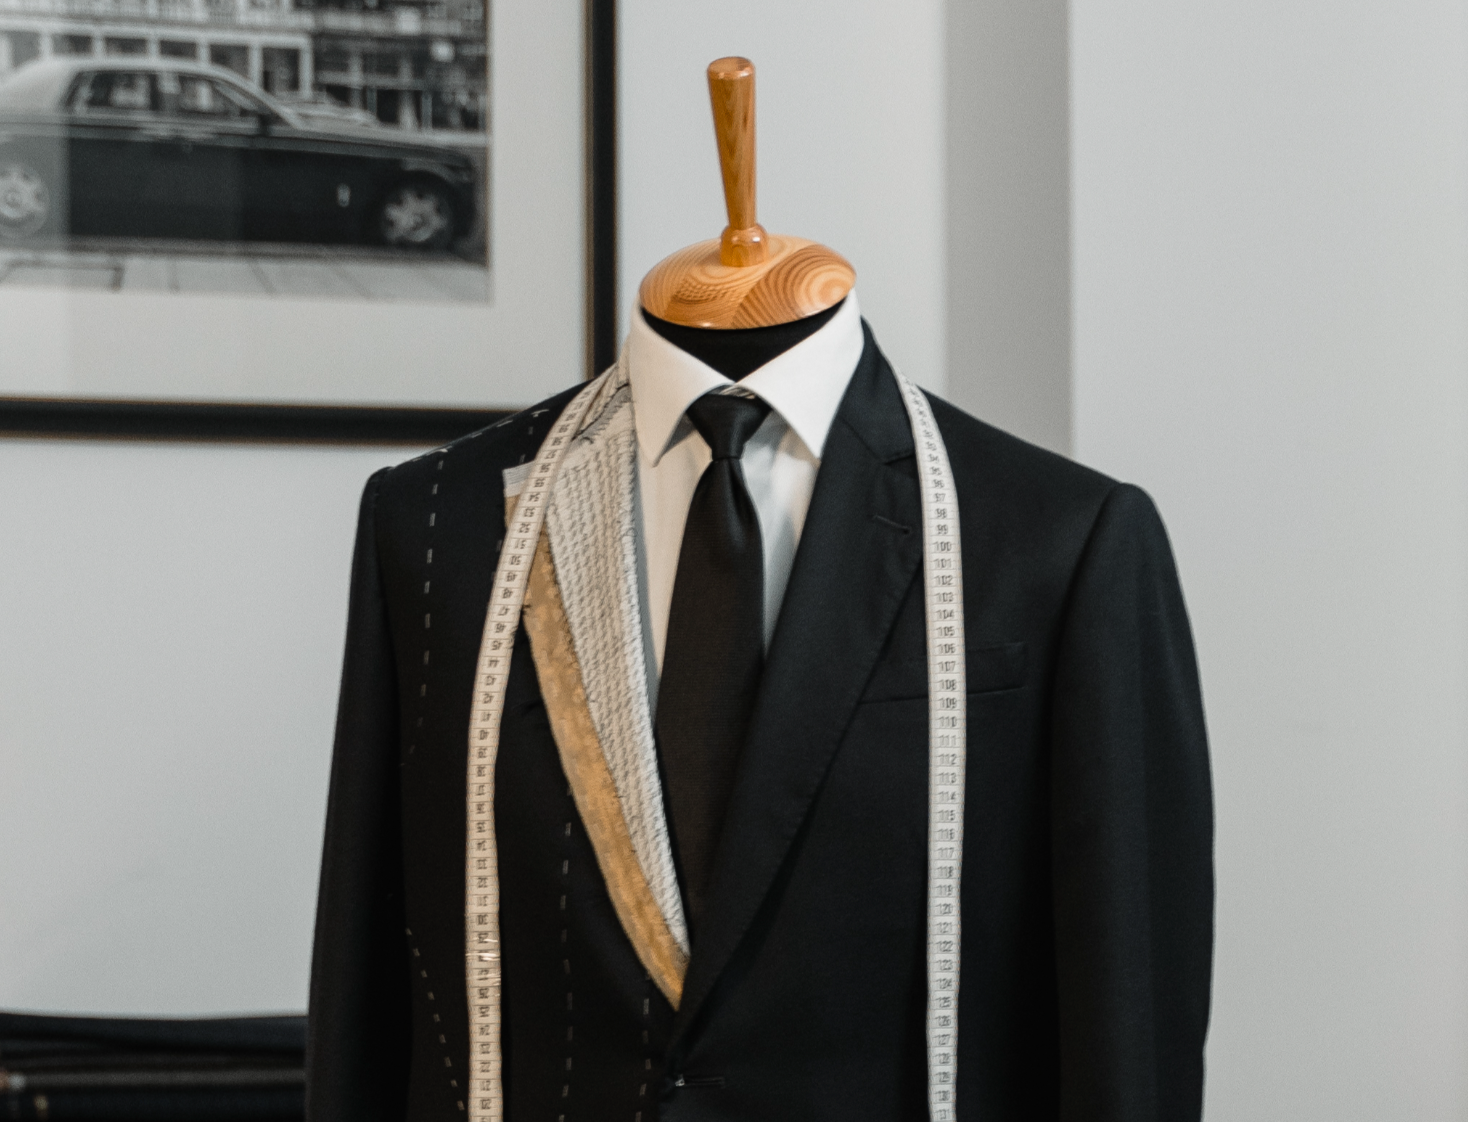 Use Our Suit Size Calculator for Men's Suit Jacket Sizes - Nimble Made